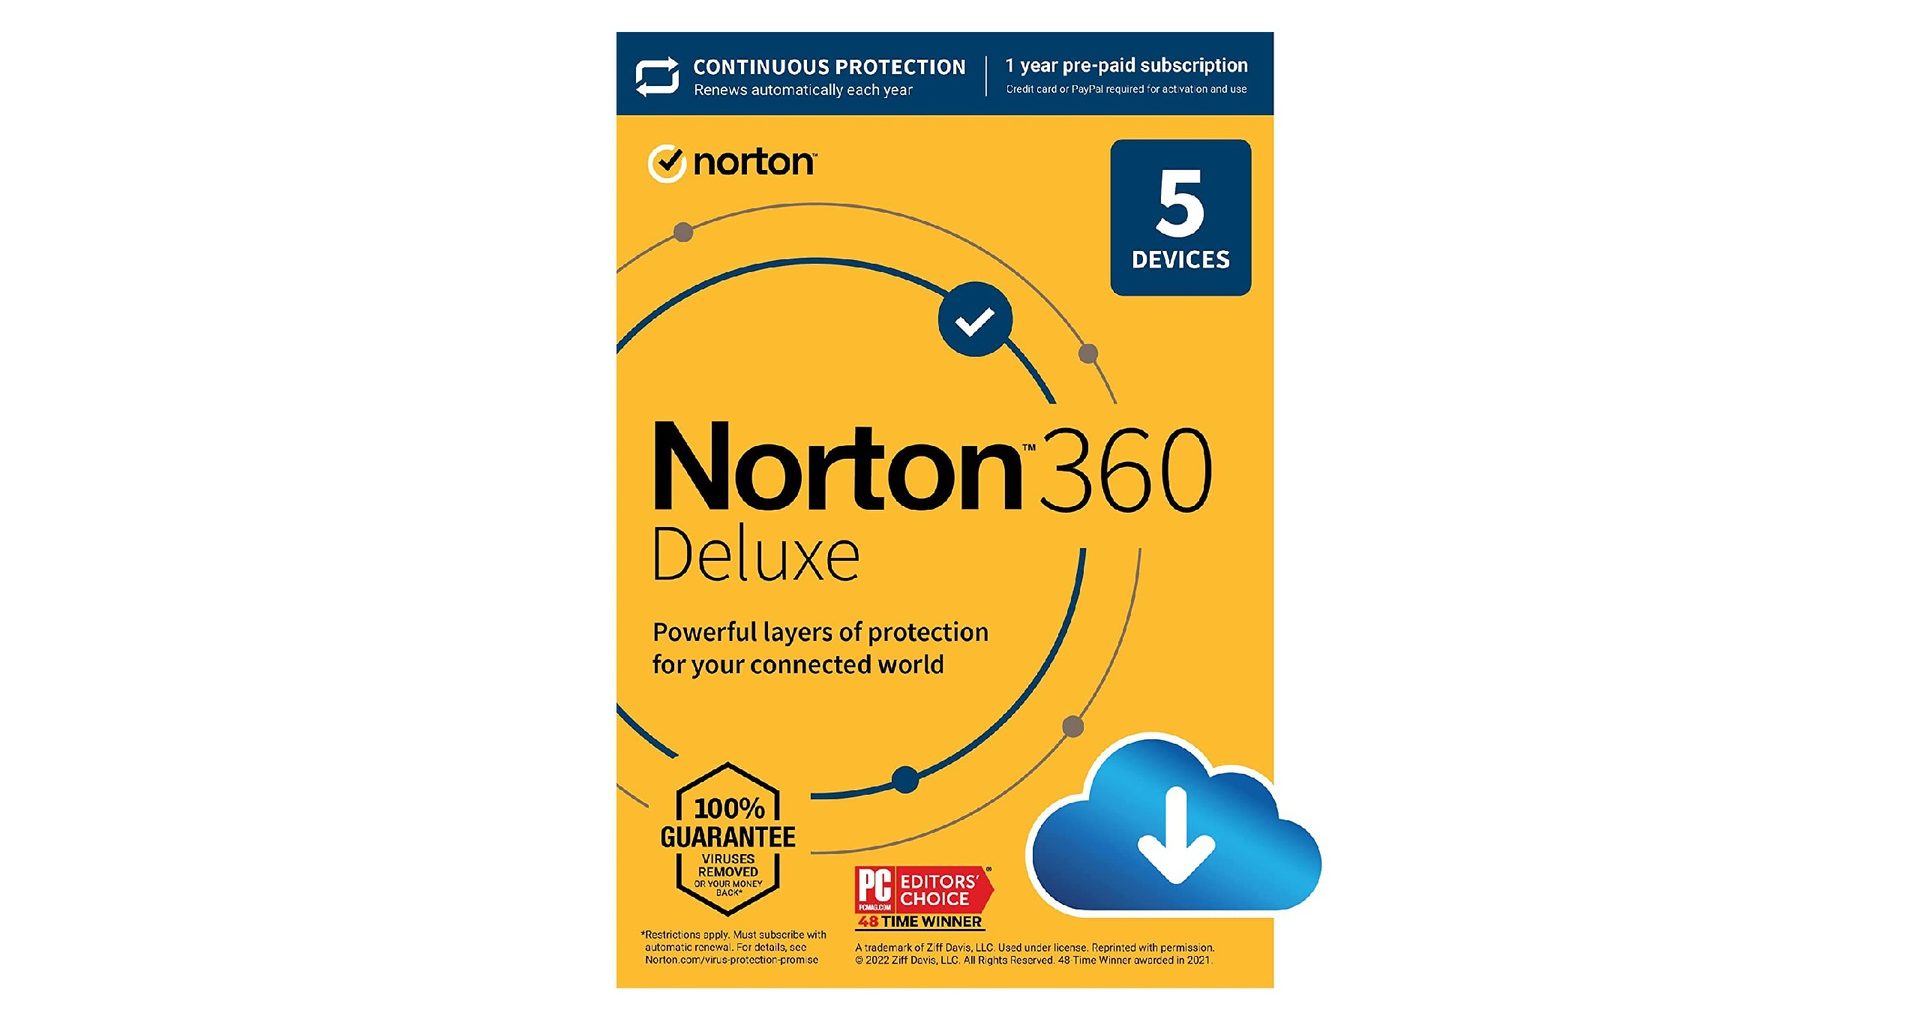 Norton 360 with Deluxe